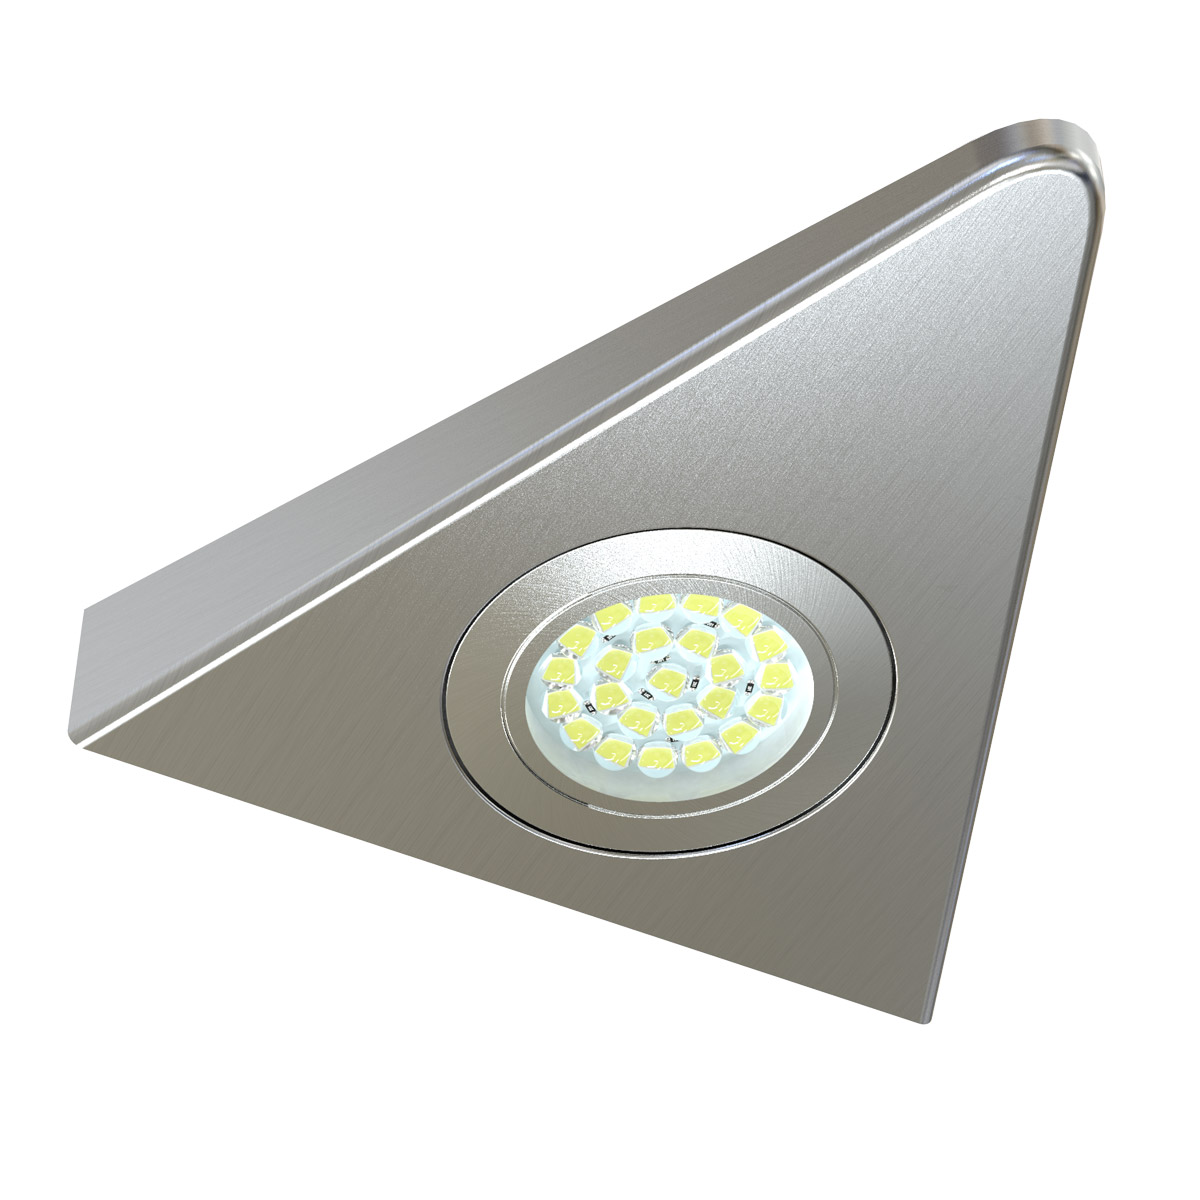 View Super Slim High Power 18w LED Triangle CabinetLight Cool White or Warm White information